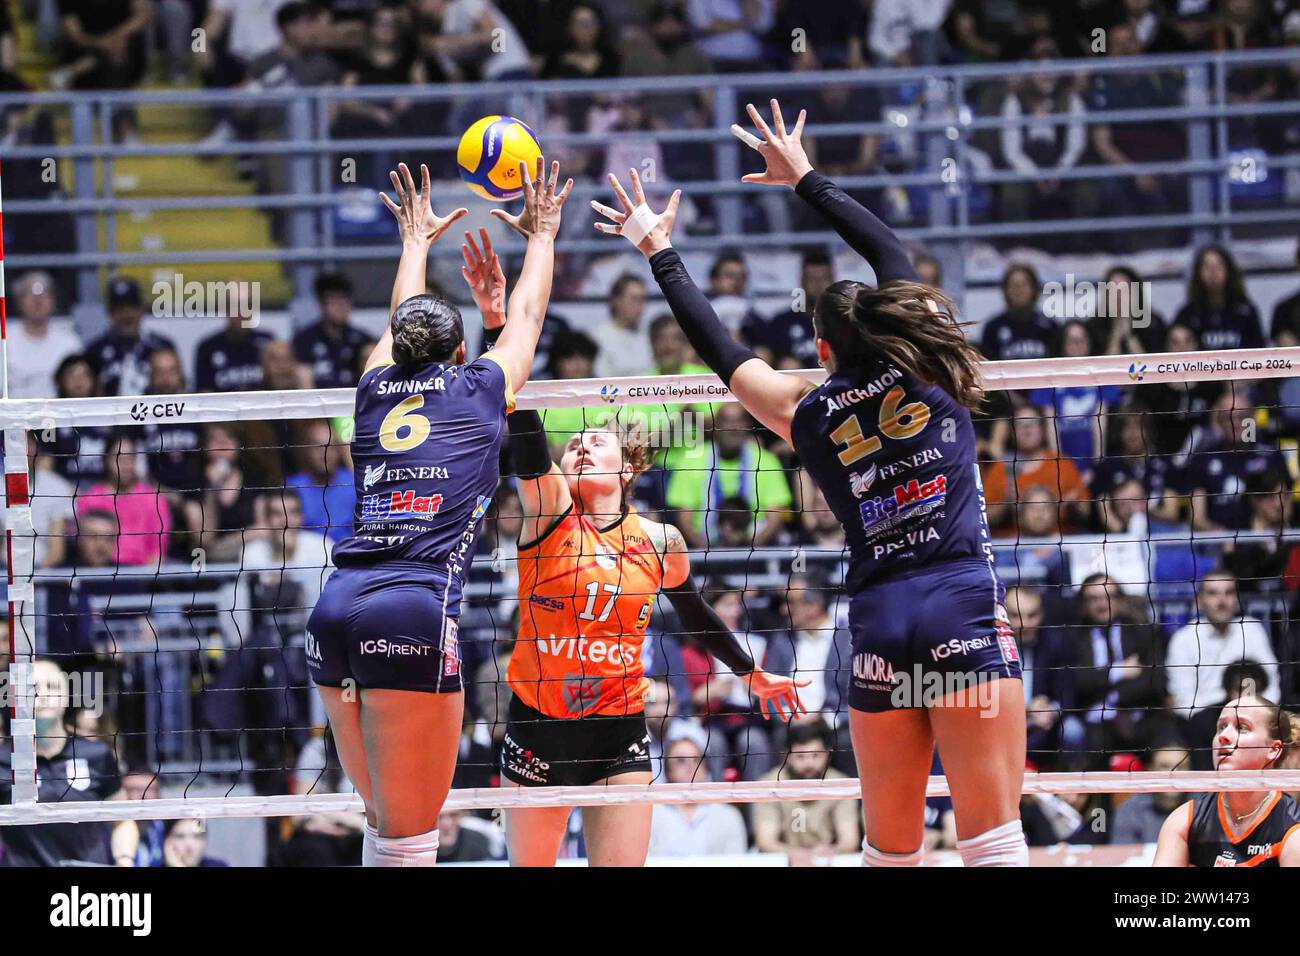 Turin, Italy. 20th Mar, 2024. #17 Tessa Grubbs (Viteos Neuchatel UC) during Reale Mutua Fenera Chieri vs Viteos Neuchatel, Volleyball CEV Cup Women match in Turin, Italy, March 20 2024 Credit: Independent Photo Agency/Alamy Live News Stock Photo